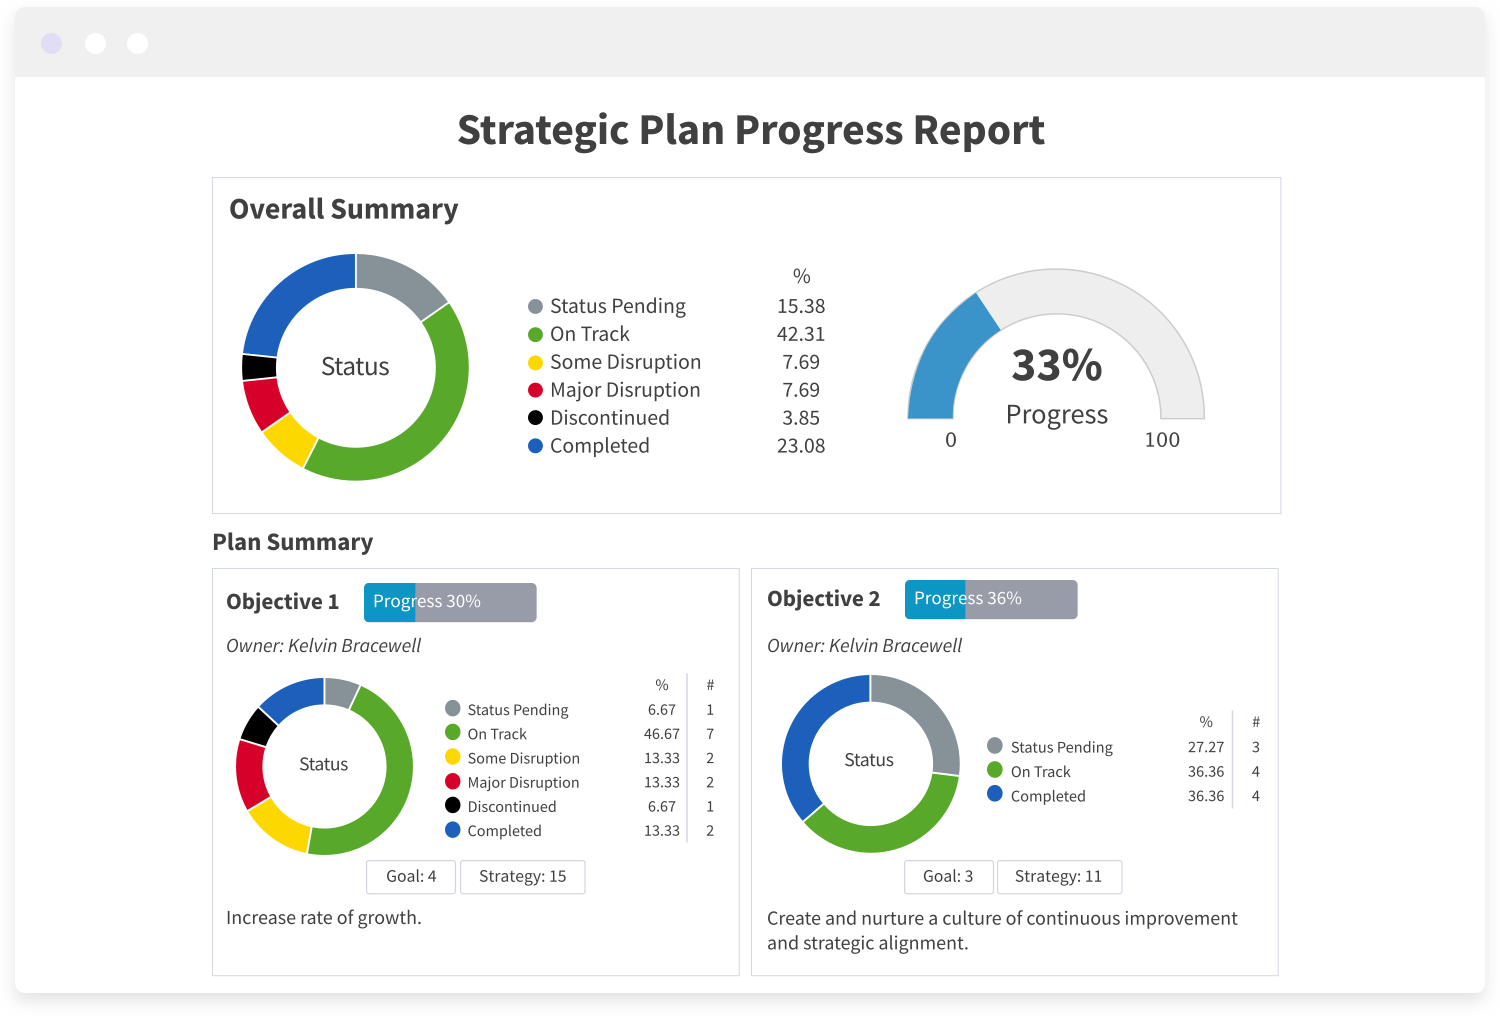 Automate progress reporting. Deliver timely progress reports to your board, council, staff, or other stakeholders. Create reports on any element of your plan (e.g. priority or status), then automatically roll up actions & updates to show overall progress.